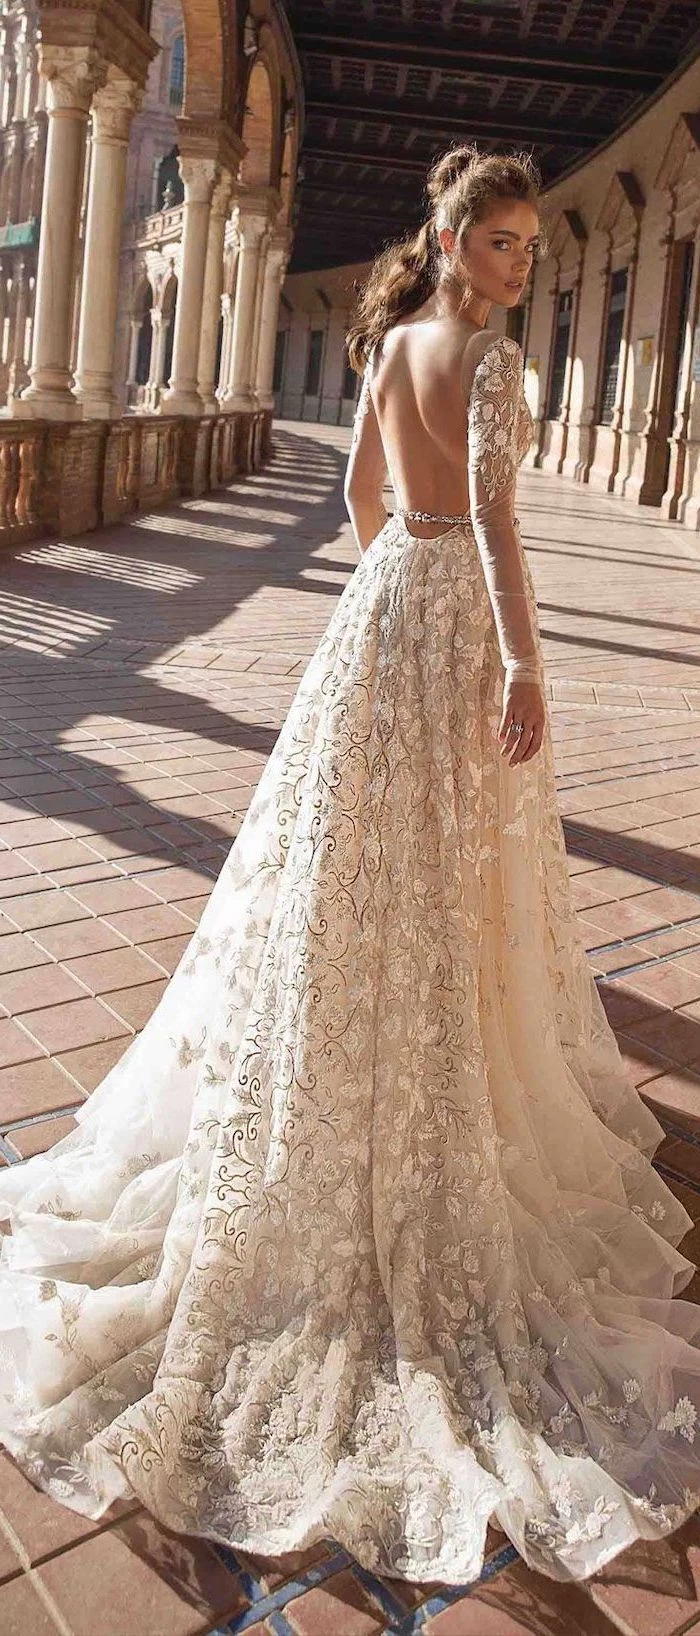 long sleeve lace mermaid wedding dress, bare back, long train, brown hair, in a ponytail